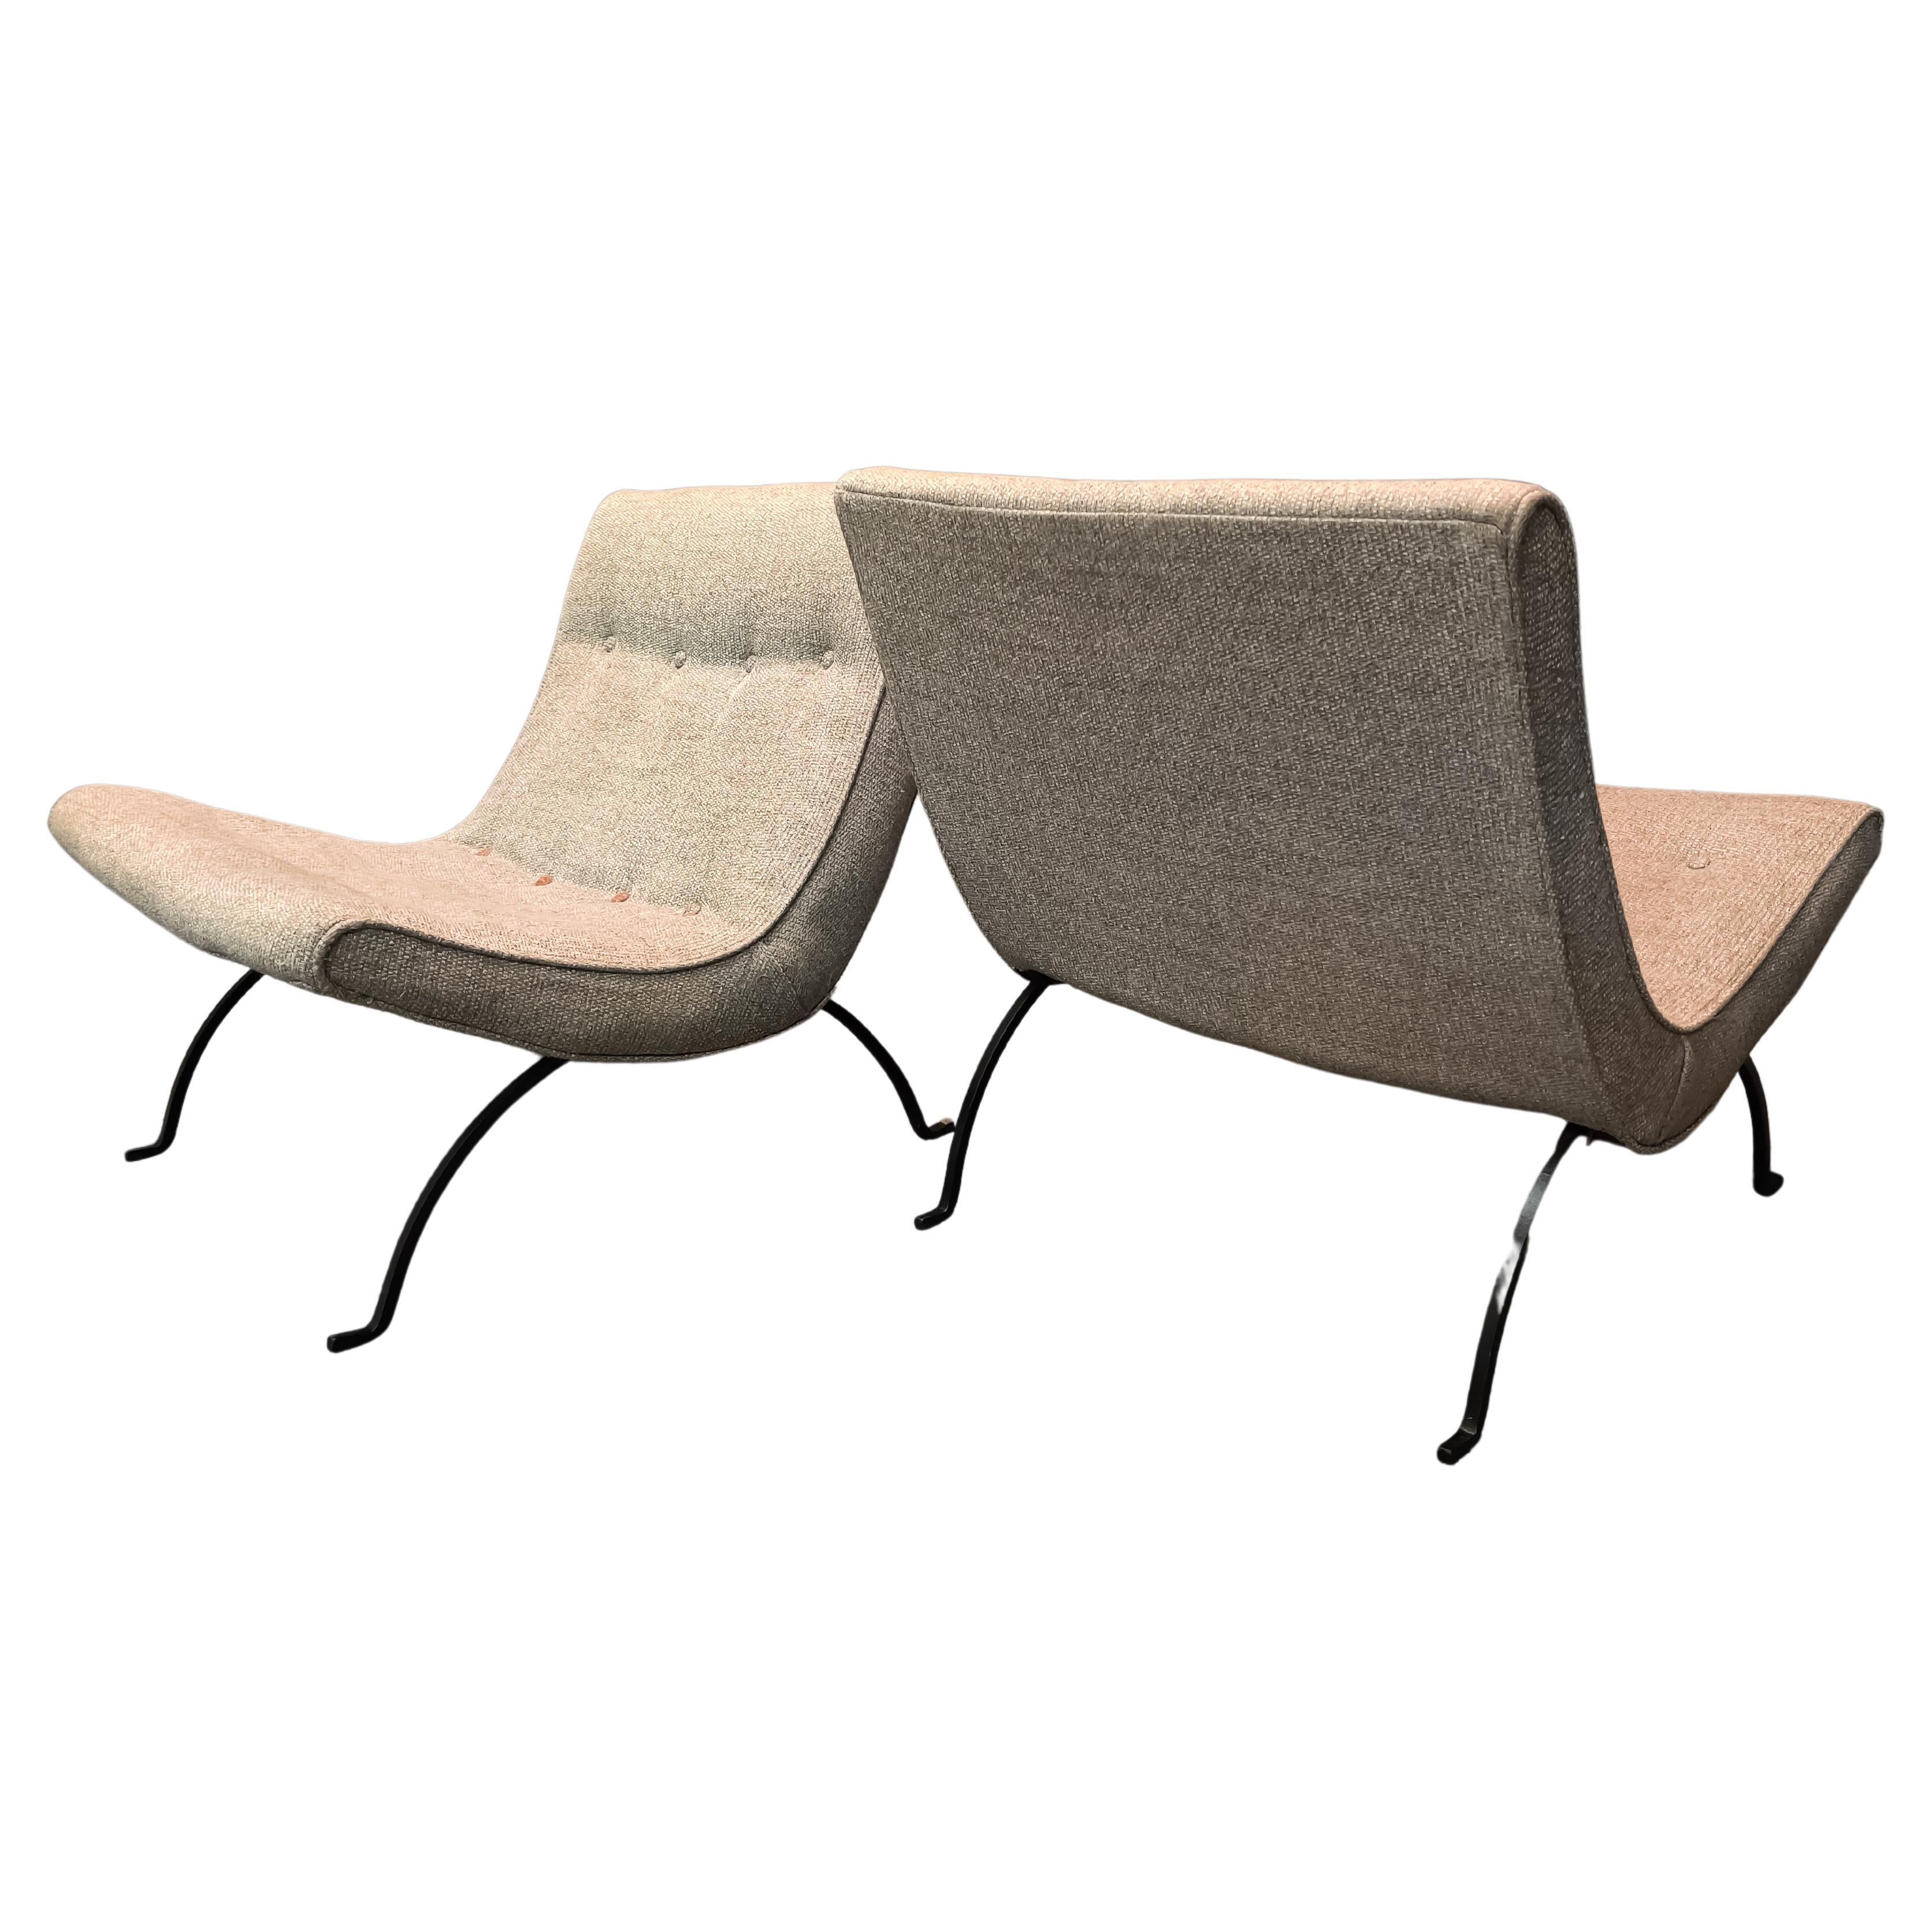 Milo Baughman Scoop Chair in Cream Upholstery with Iron Legs c. 1950s